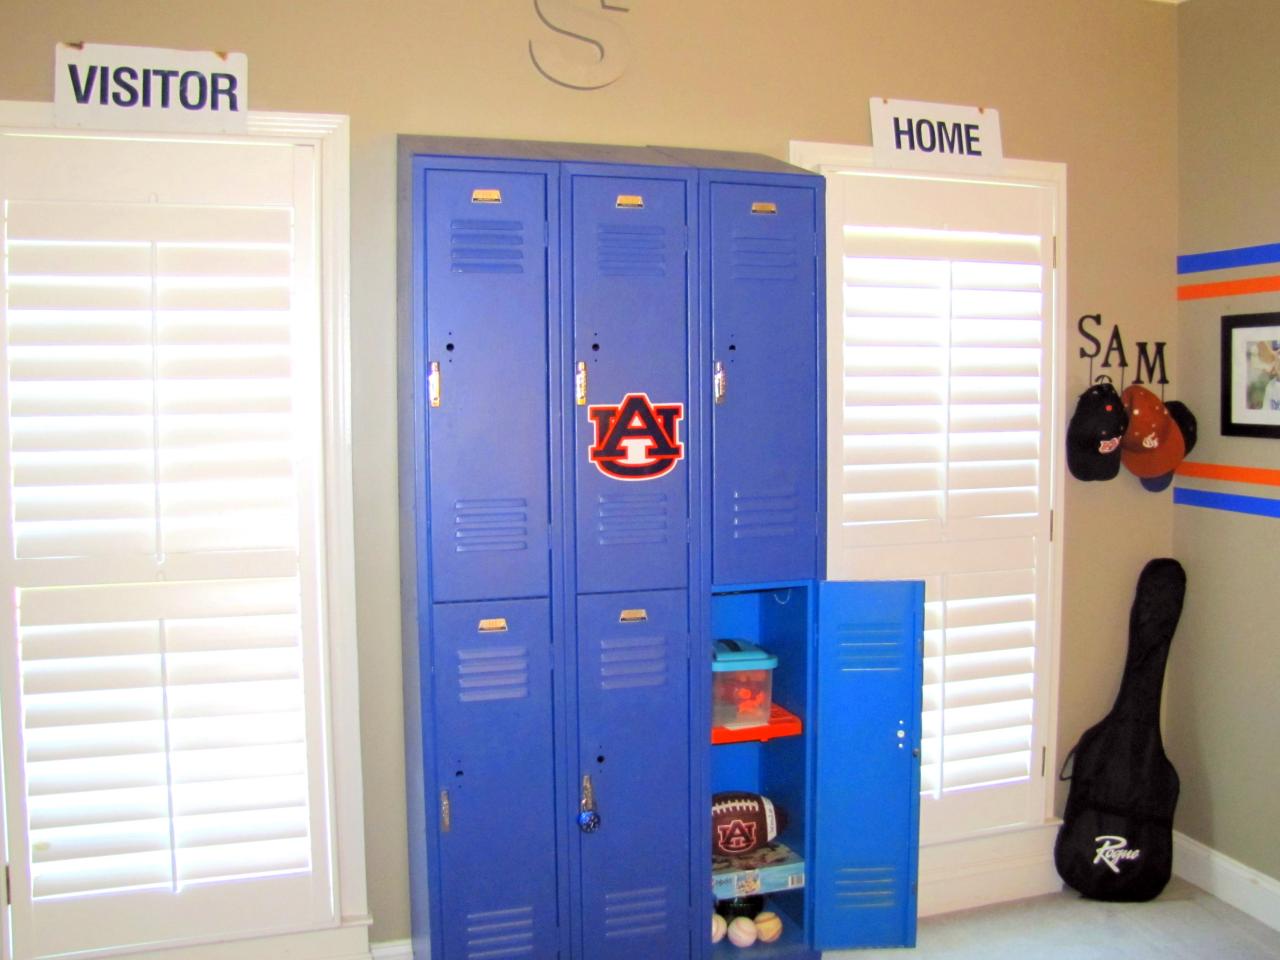 cheap storage units for kids rooms